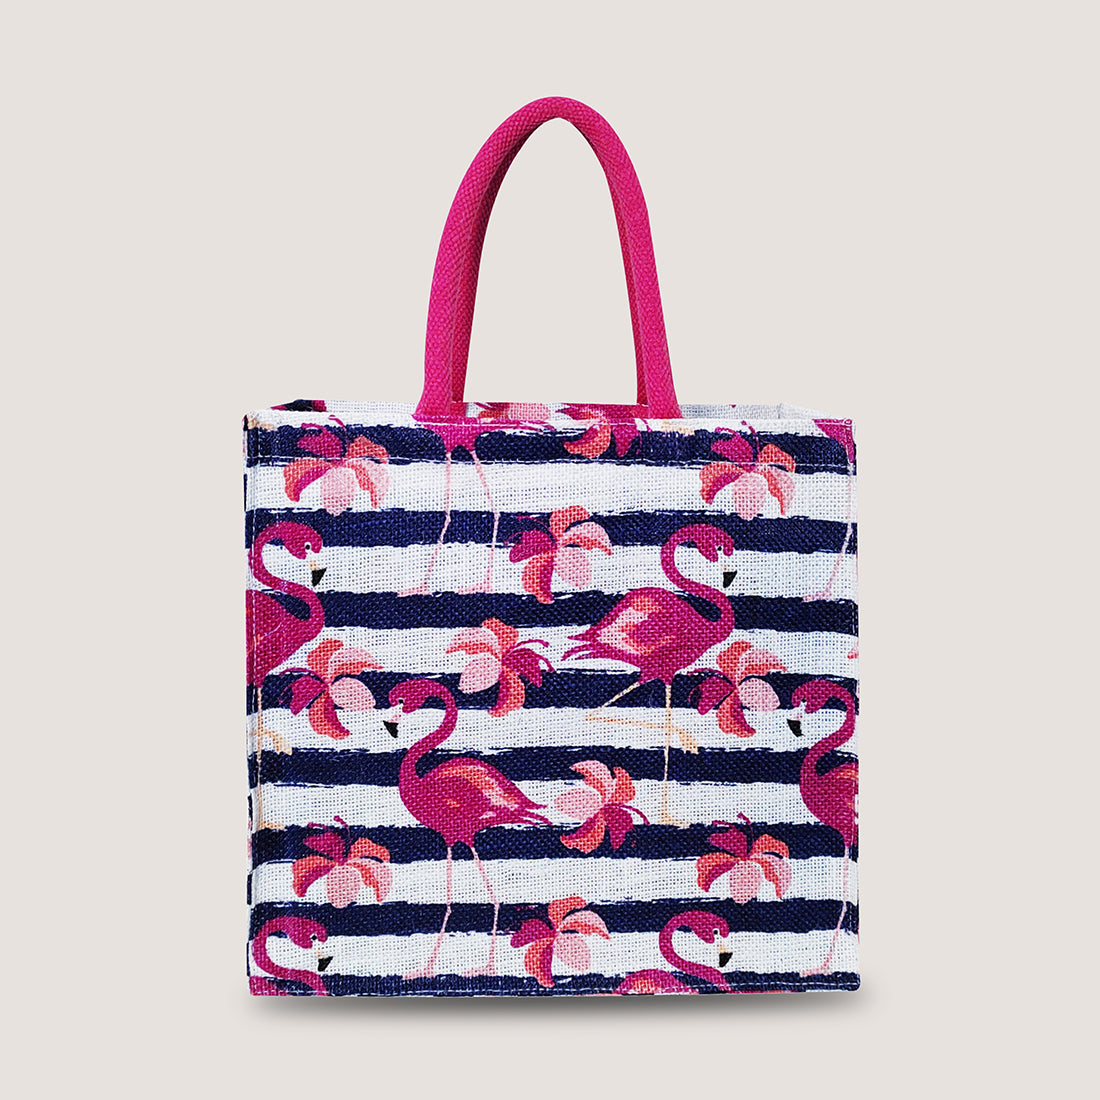 EARTHBAGS FLAMINGO PRINTED LUNCH BAGS WITH PADDED HANDLES